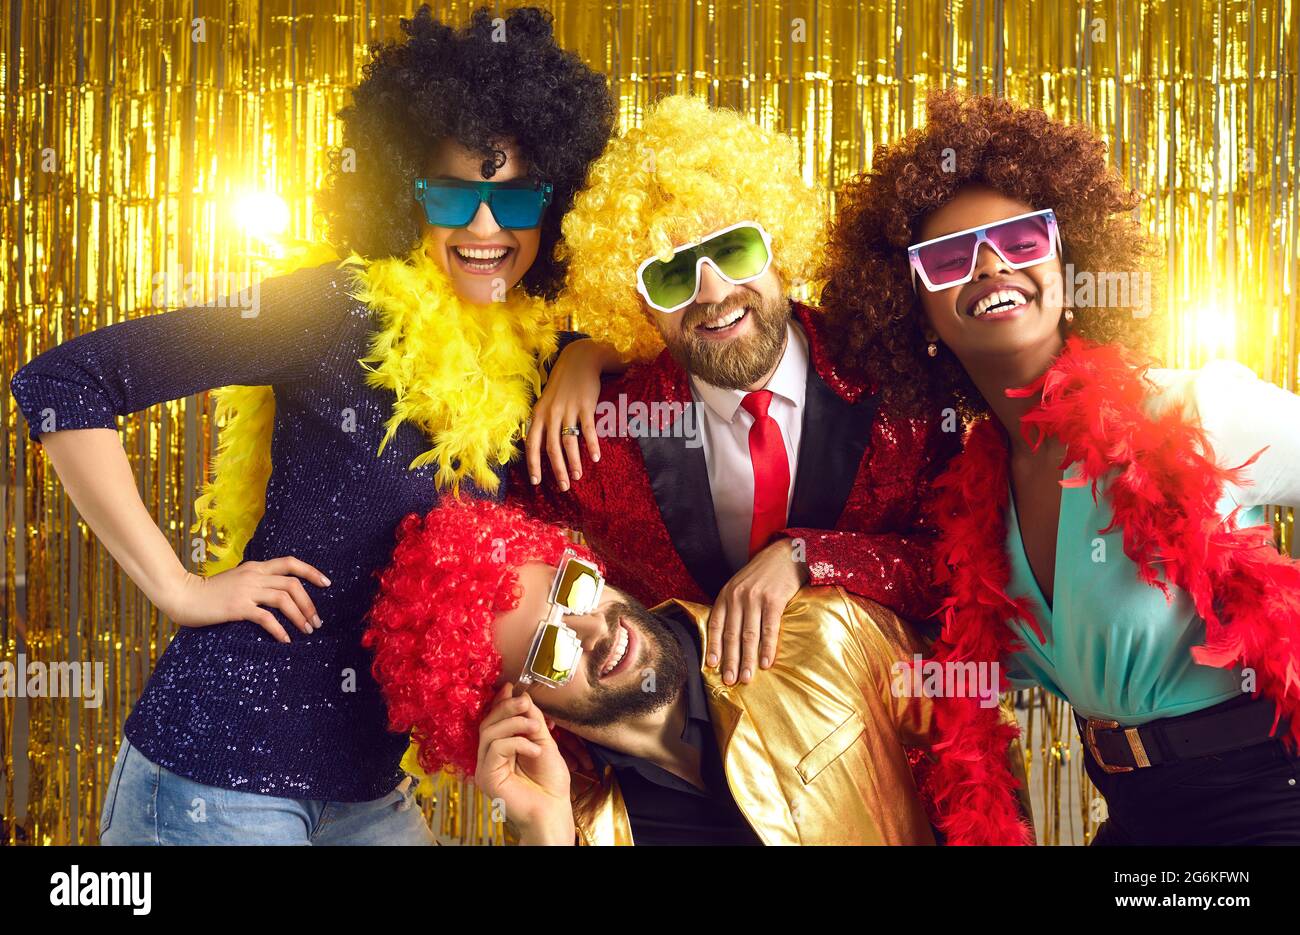 Toothy smiling positive carefree friends posing for camera in party hair wig Stock Photo